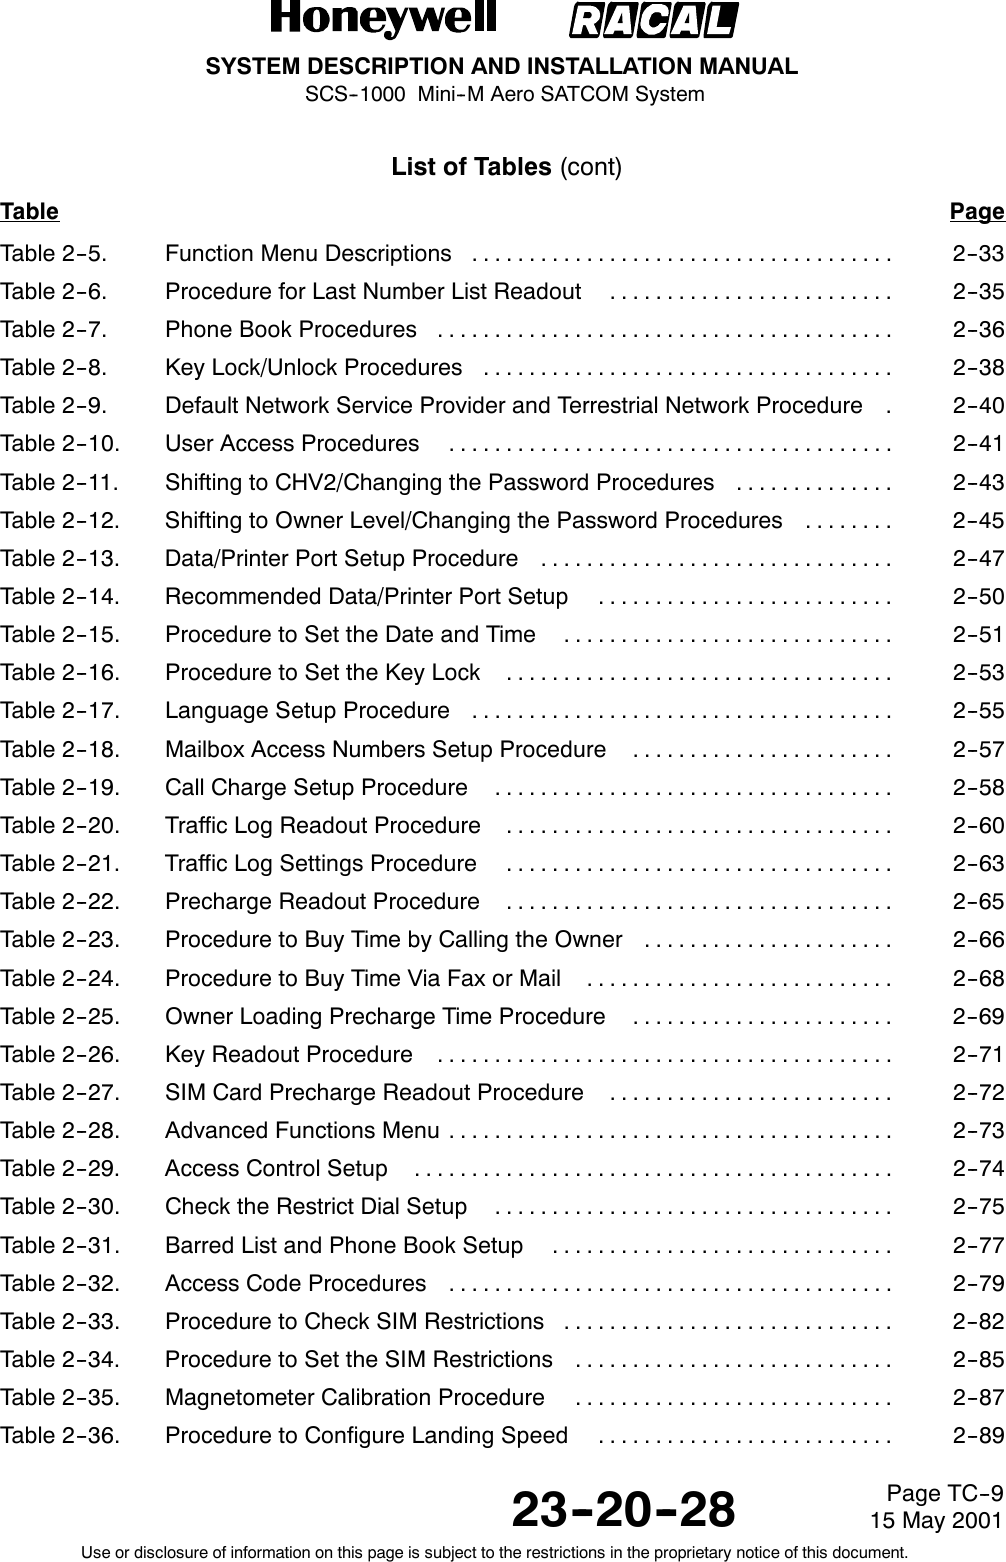 SYSTEM DESCRIPTION AND INSTALLATION MANUALSCS--1000 Mini--M Aero SATCOM System23--20--28Use or disclosure of information on this page is subject to the restrictions in the proprietary notice of this document.Page TC--915 May 2001List of Tables (cont)Table PageTable 2--5. Function Menu Descriptions 2--33.....................................Table 2--6. Procedure for Last Number List Readout 2--35.........................Table 2--7. Phone Book Procedures 2--36........................................Table 2--8. Key Lock/Unlock Procedures 2--38....................................Table 2--9. Default Network Service Provider and Terrestrial Network Procedure 2--40.Table 2--10. User Access Procedures 2--41.......................................Table 2--11. Shifting to CHV2/Changing the Password Procedures 2--43..............Table 2--12. Shifting to Owner Level/Changing the Password Procedures 2--45........Table 2--13. Data/Printer Port Setup Procedure 2--47...............................Table 2--14. Recommended Data/Printer Port Setup 2--50..........................Table 2--15. Procedure to Set the Date and Time 2--51.............................Table 2--16. Procedure to Set the Key Lock 2--53..................................Table 2--17. Language Setup Procedure 2--55.....................................Table 2--18. Mailbox Access Numbers Setup Procedure 2--57.......................Table 2--19. Call Charge Setup Procedure 2--58...................................Table 2--20. Traffic Log Readout Procedure 2--60..................................Table 2--21. Traffic Log Settings Procedure 2--63..................................Table 2--22. Precharge Readout Procedure 2--65..................................Table 2--23. Procedure to Buy Time by Calling the Owner 2--66......................Table 2--24. Procedure to Buy Time Via Fax or Mail 2--68...........................Table 2--25. Owner Loading Precharge Time Procedure 2--69.......................Table 2--26. Key Readout Procedure 2--71........................................Table 2--27. SIM Card Precharge Readout Procedure 2--72.........................Table 2--28. Advanced Functions Menu 2--73.......................................Table 2--29. Access Control Setup 2--74..........................................Table 2--30. Check the Restrict Dial Setup 2--75...................................Table 2--31. Barred List and Phone Book Setup 2--77..............................Table 2--32. Access Code Procedures 2--79.......................................Table 2--33. Procedure to Check SIM Restrictions 2--82.............................Table 2--34. Procedure to Set the SIM Restrictions 2--85............................Table 2--35. Magnetometer Calibration Procedure 2--87............................Table 2--36. Procedure to Configure Landing Speed 2--89..........................